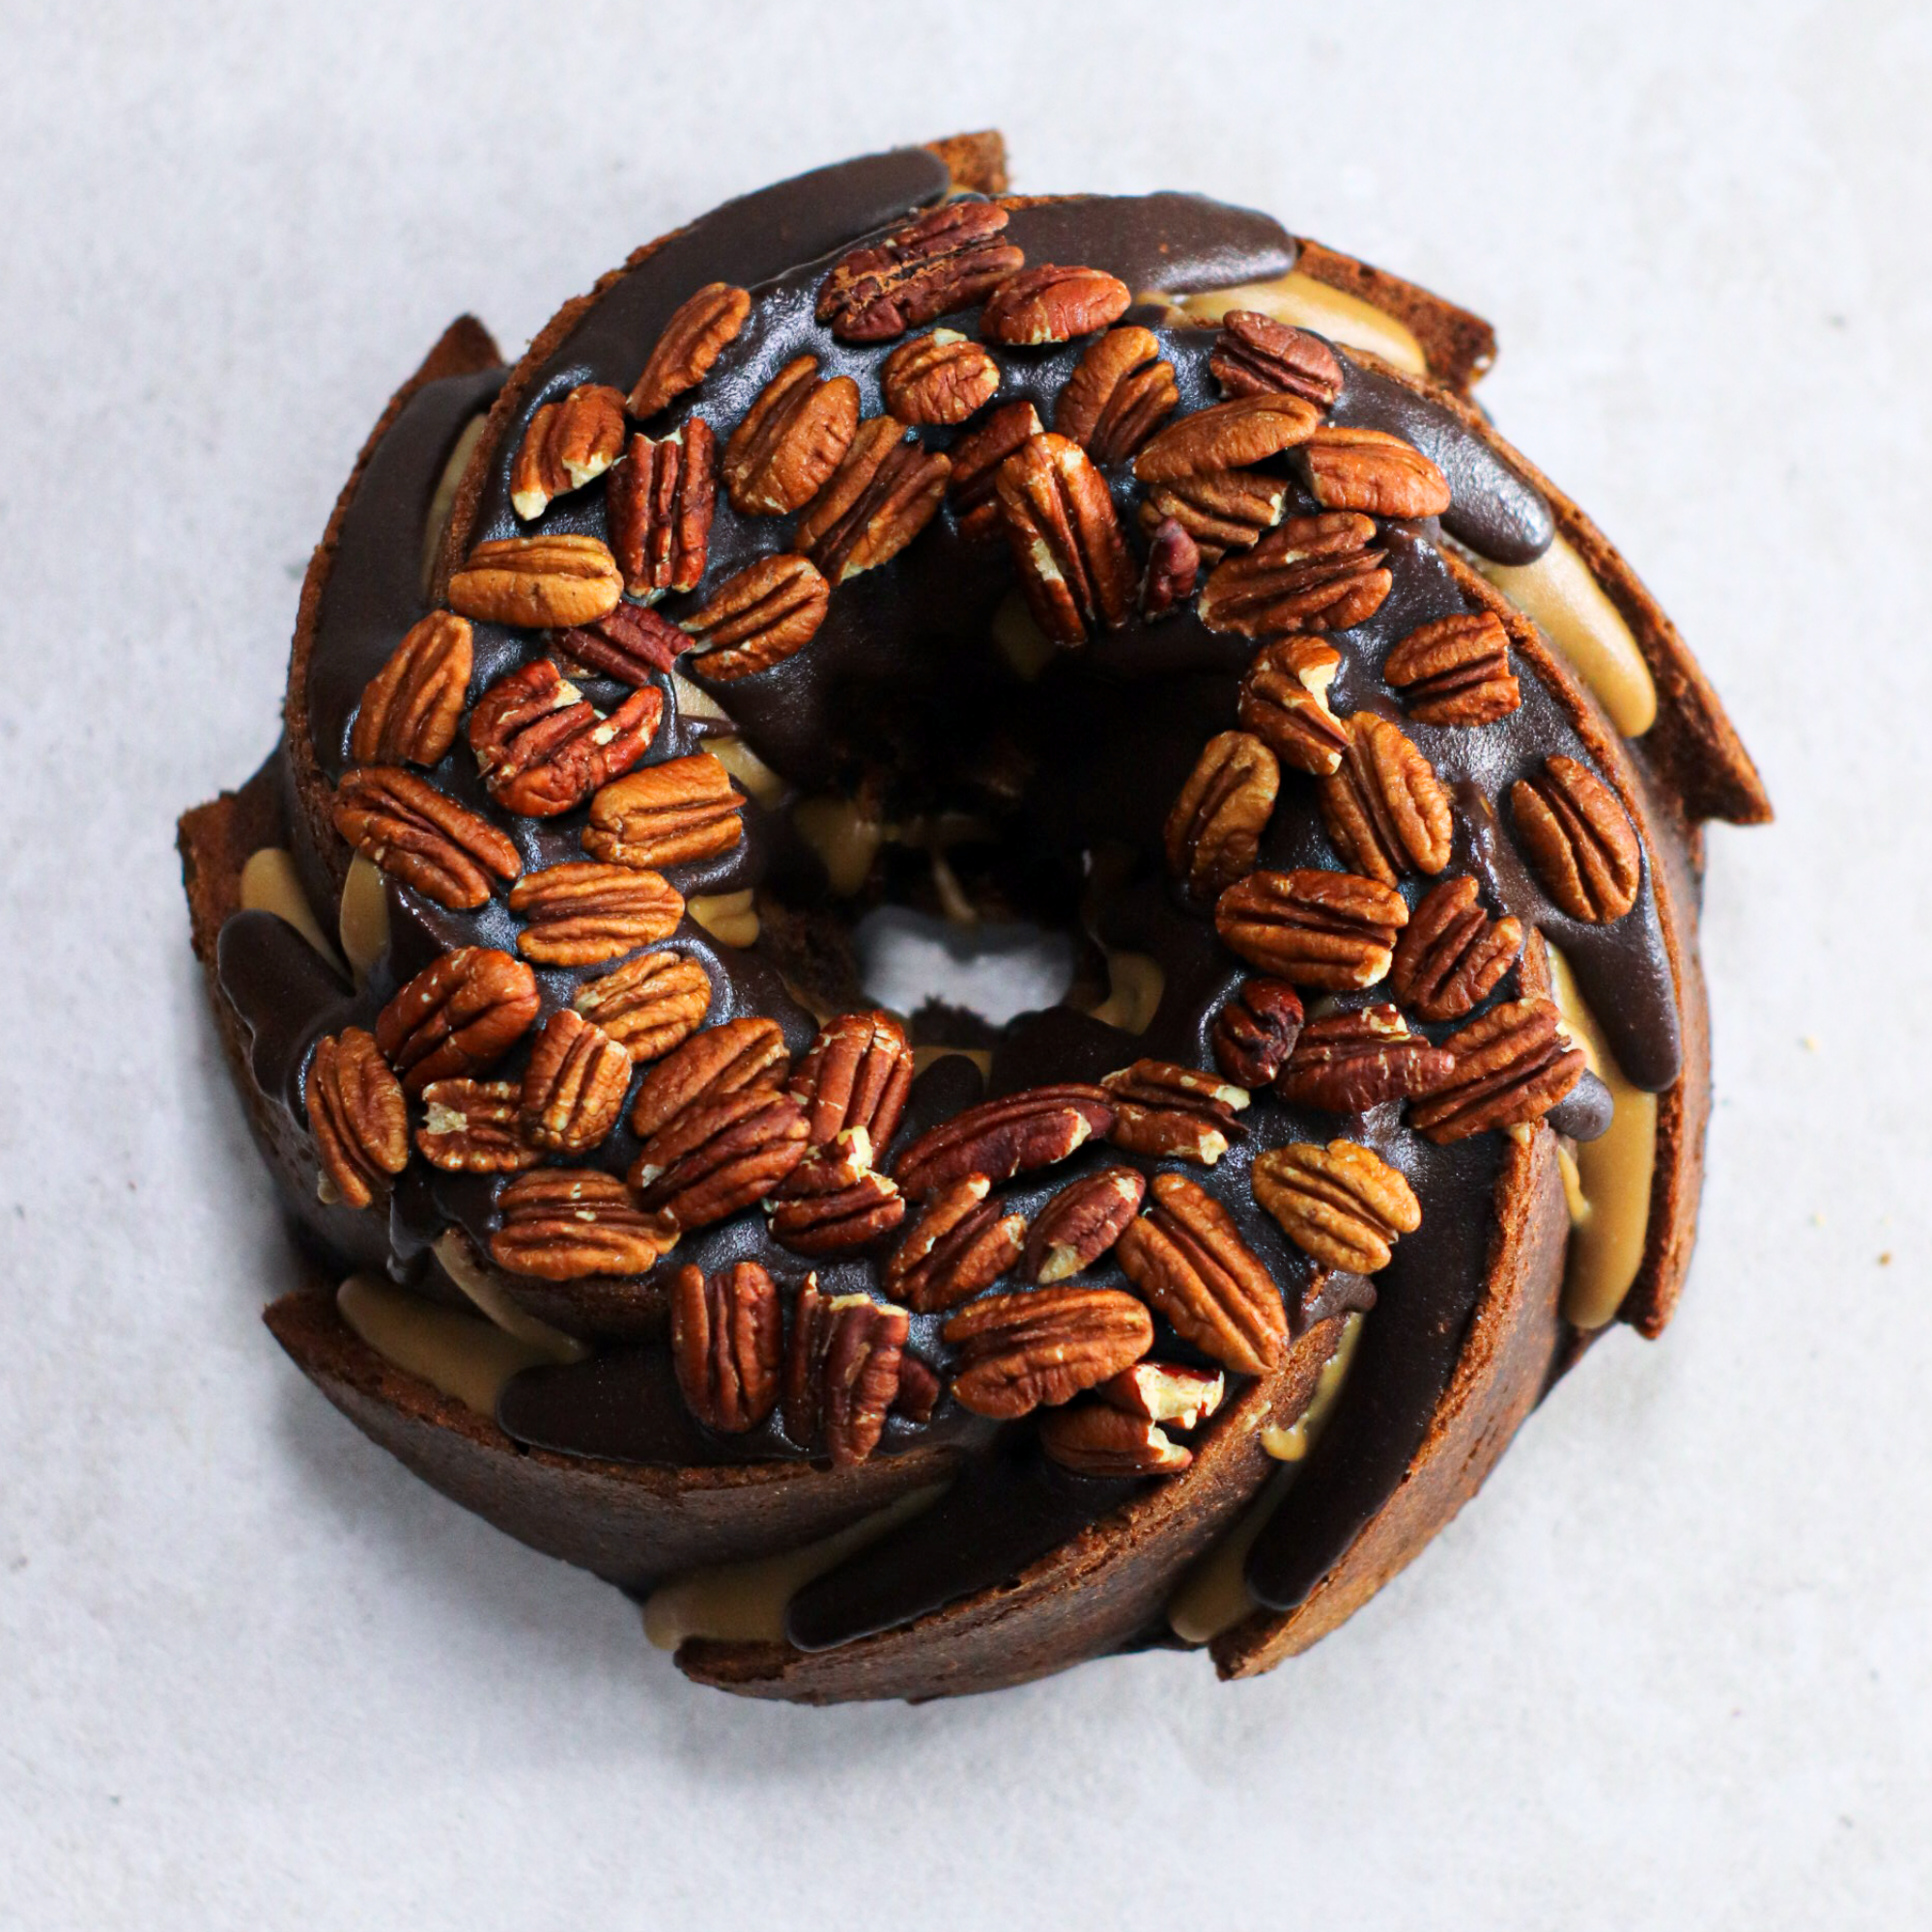 Chocolate Turtle Bundt Cake | You're guaranteed to make chocolate AND  caramel fans happy with every bite of this decadent *Chocolate Turtle Bundt  Cake!!* Get the FULL recipe here:... | By Melissa's